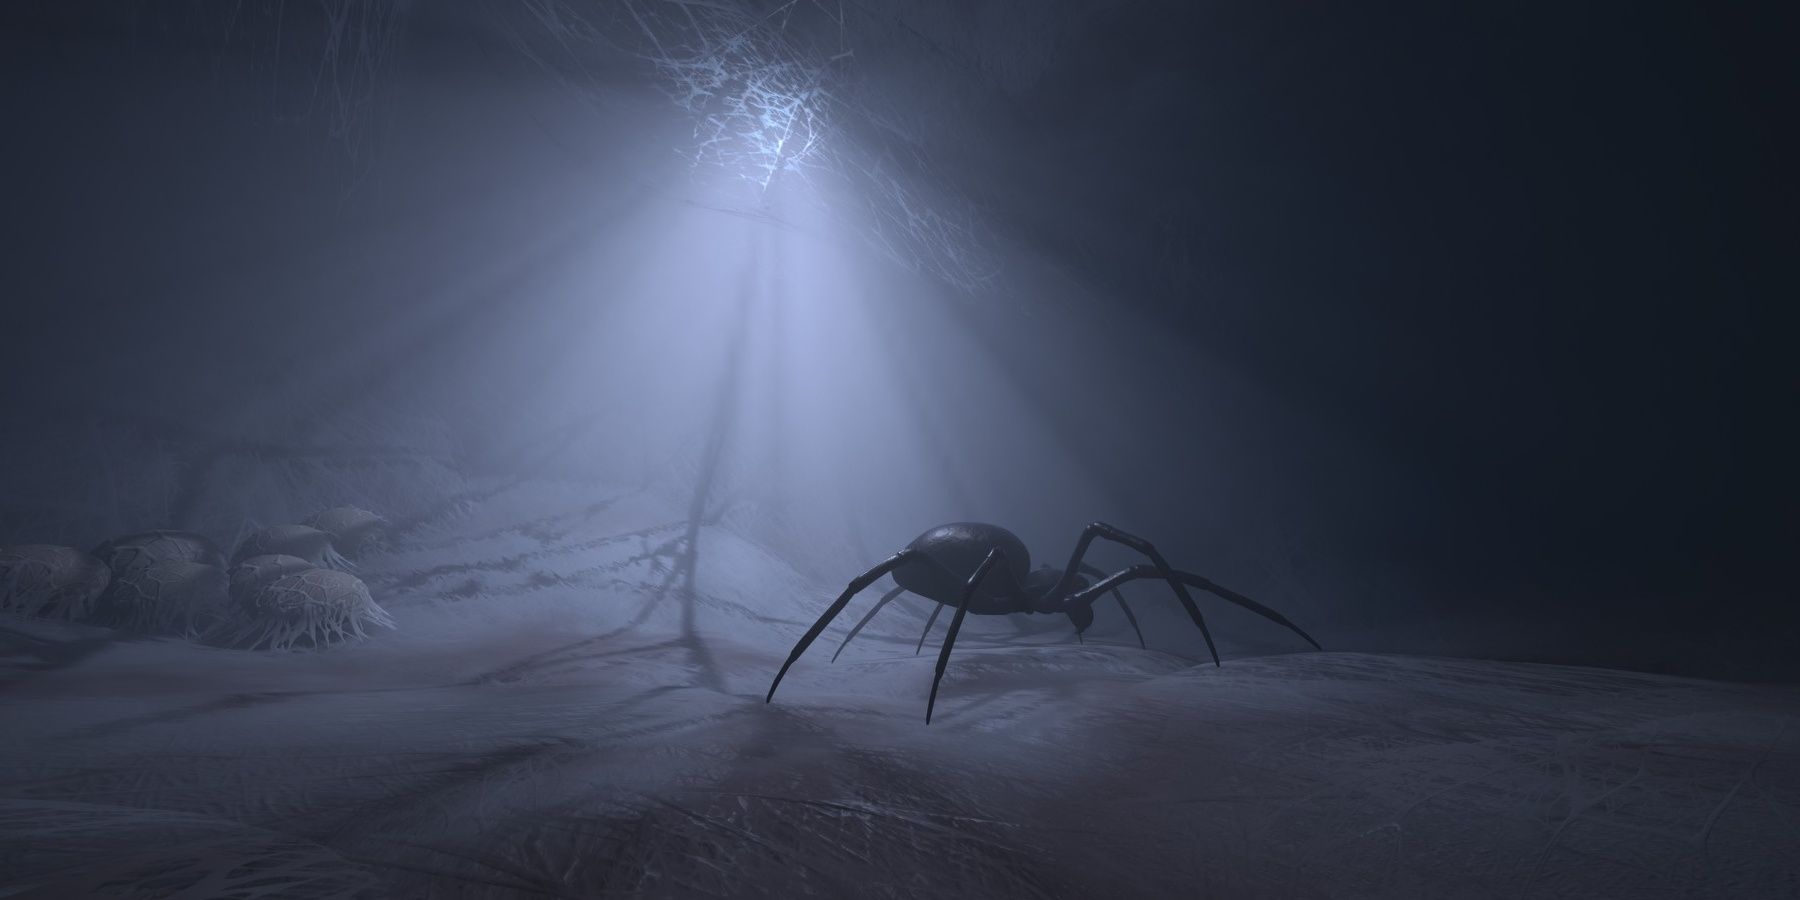 Earth's Best Small Details: Insect sounds like Black Widow spiders moving around.